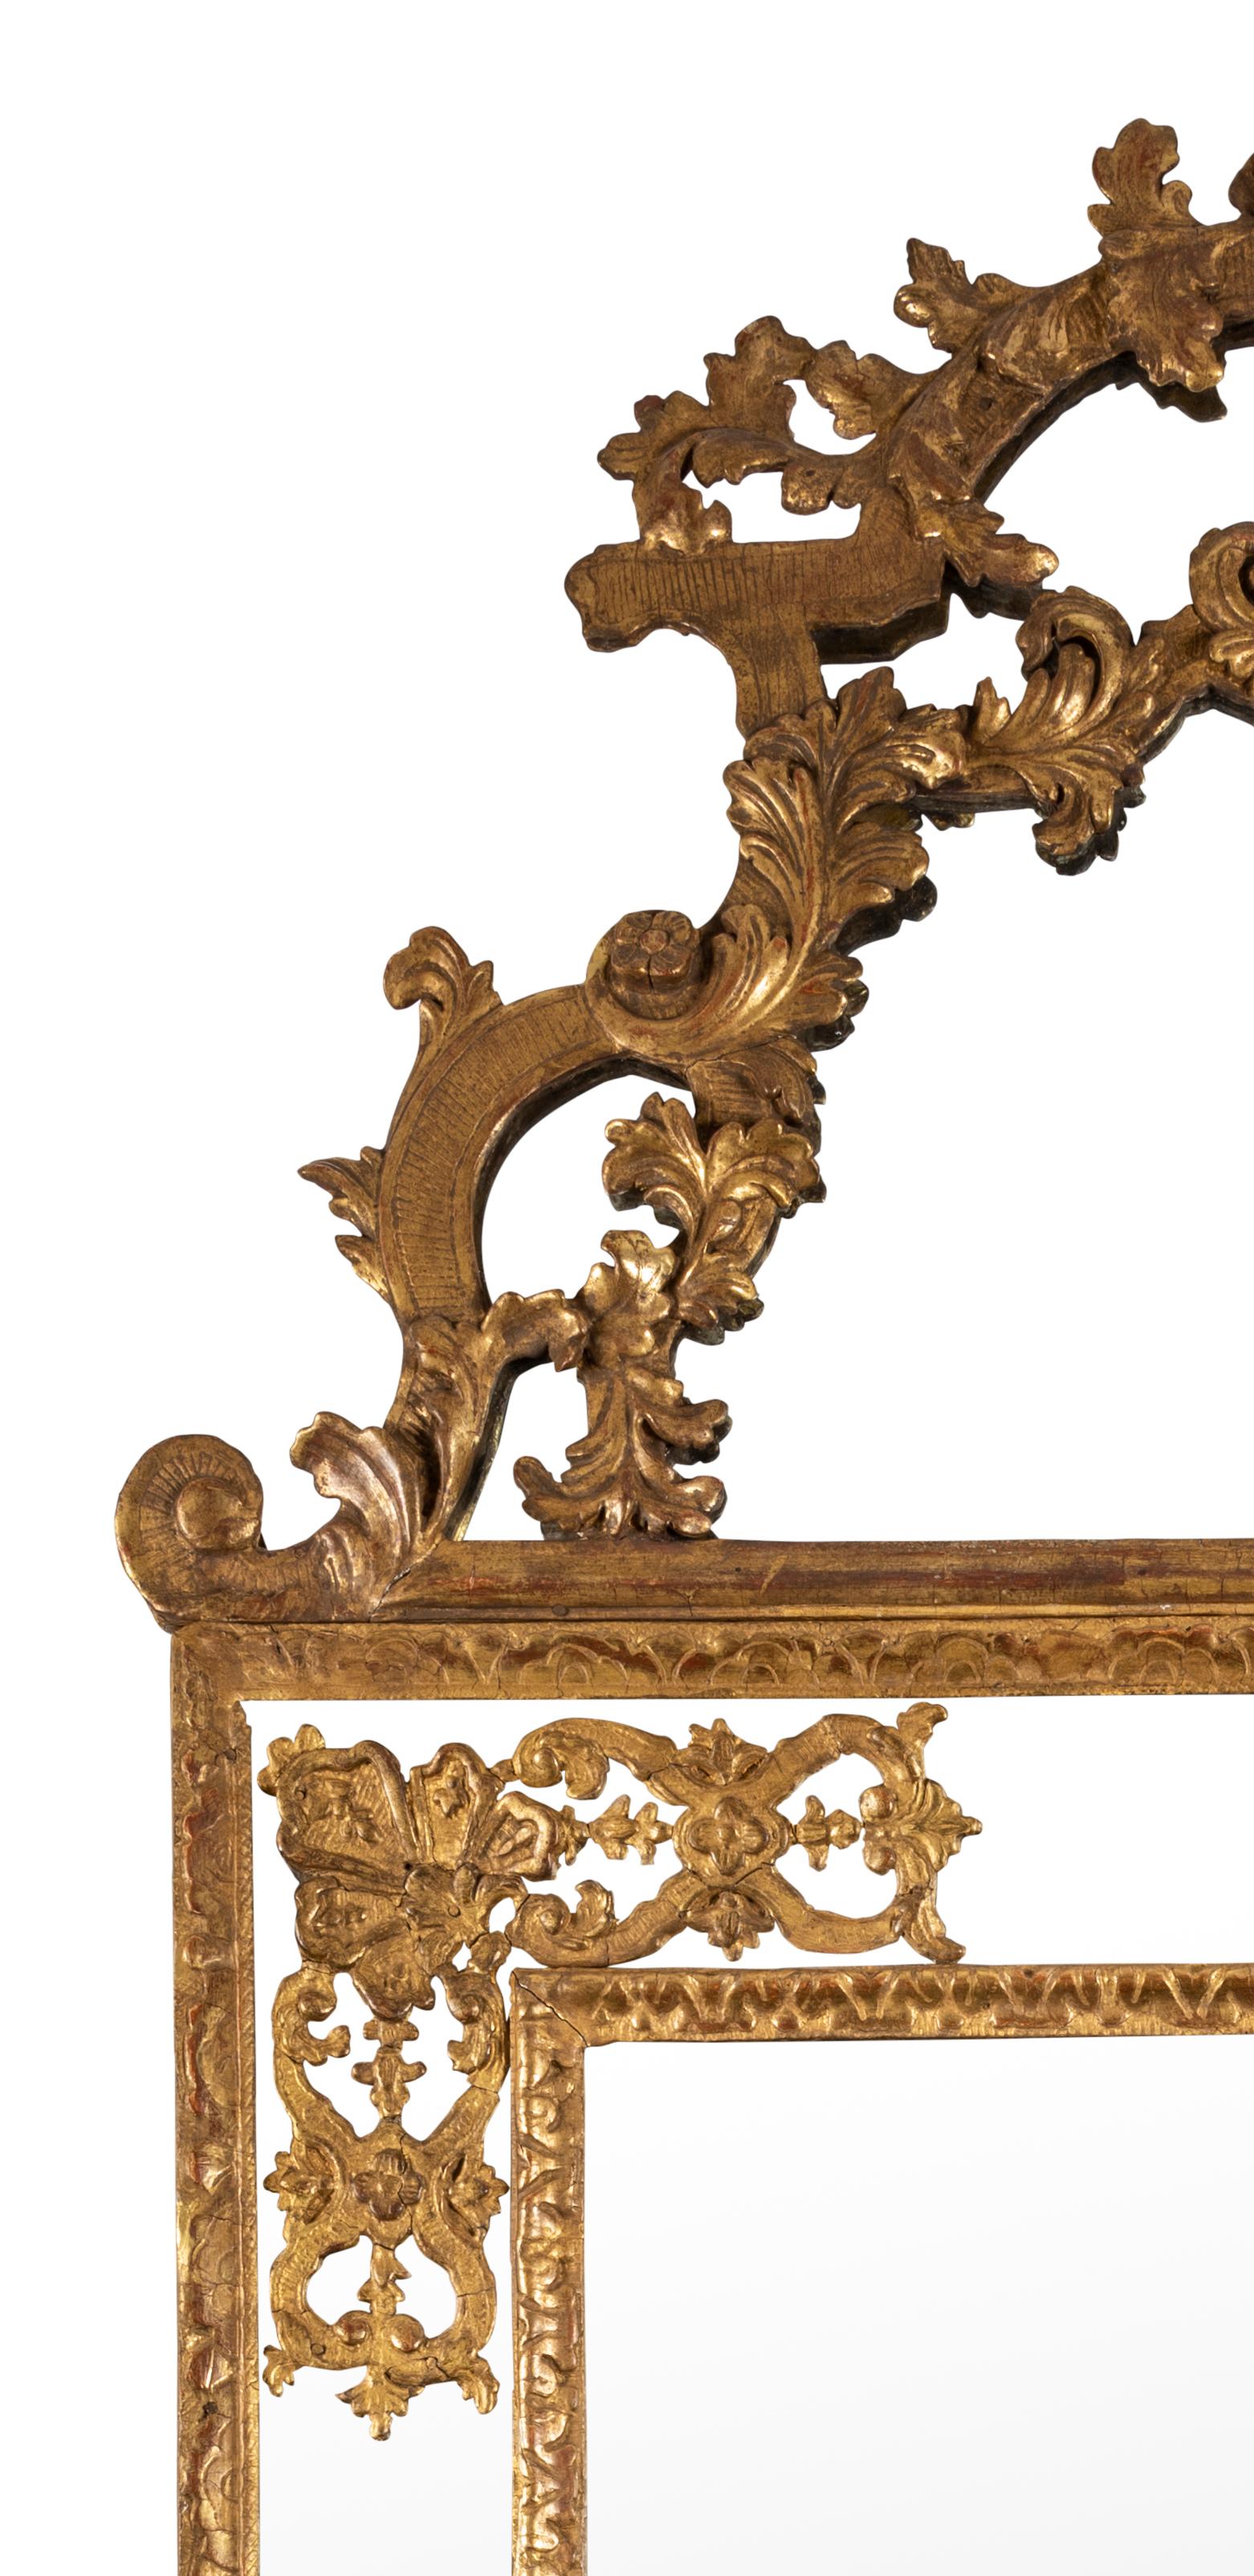 The bevelled rectangular central plate bordered by a water leaf moulding, within a mirrored surround applied with a gilt anthemion over an arrangement of pierced scrolls to each corner, extending to a stylized floral gilt moulding, rising to a